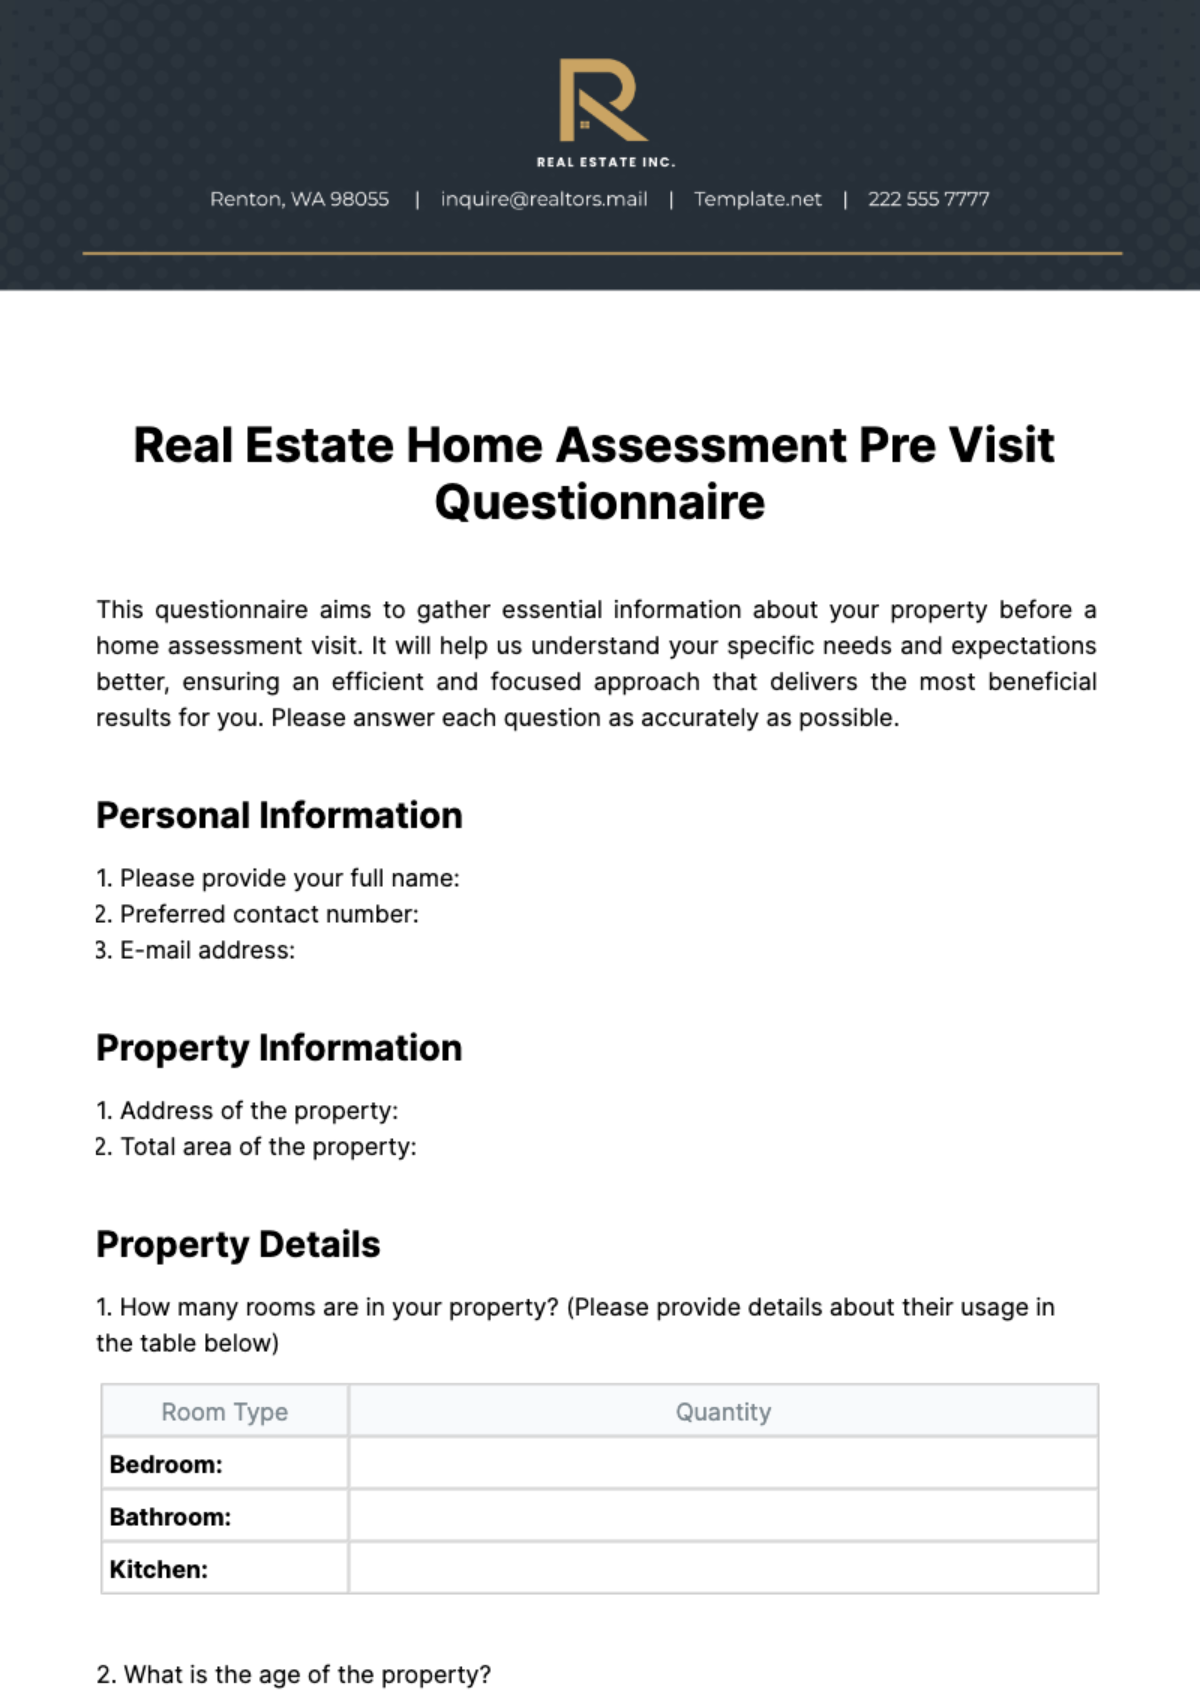 Real Estate Home Assessment Pre Visit Questionnaire Template